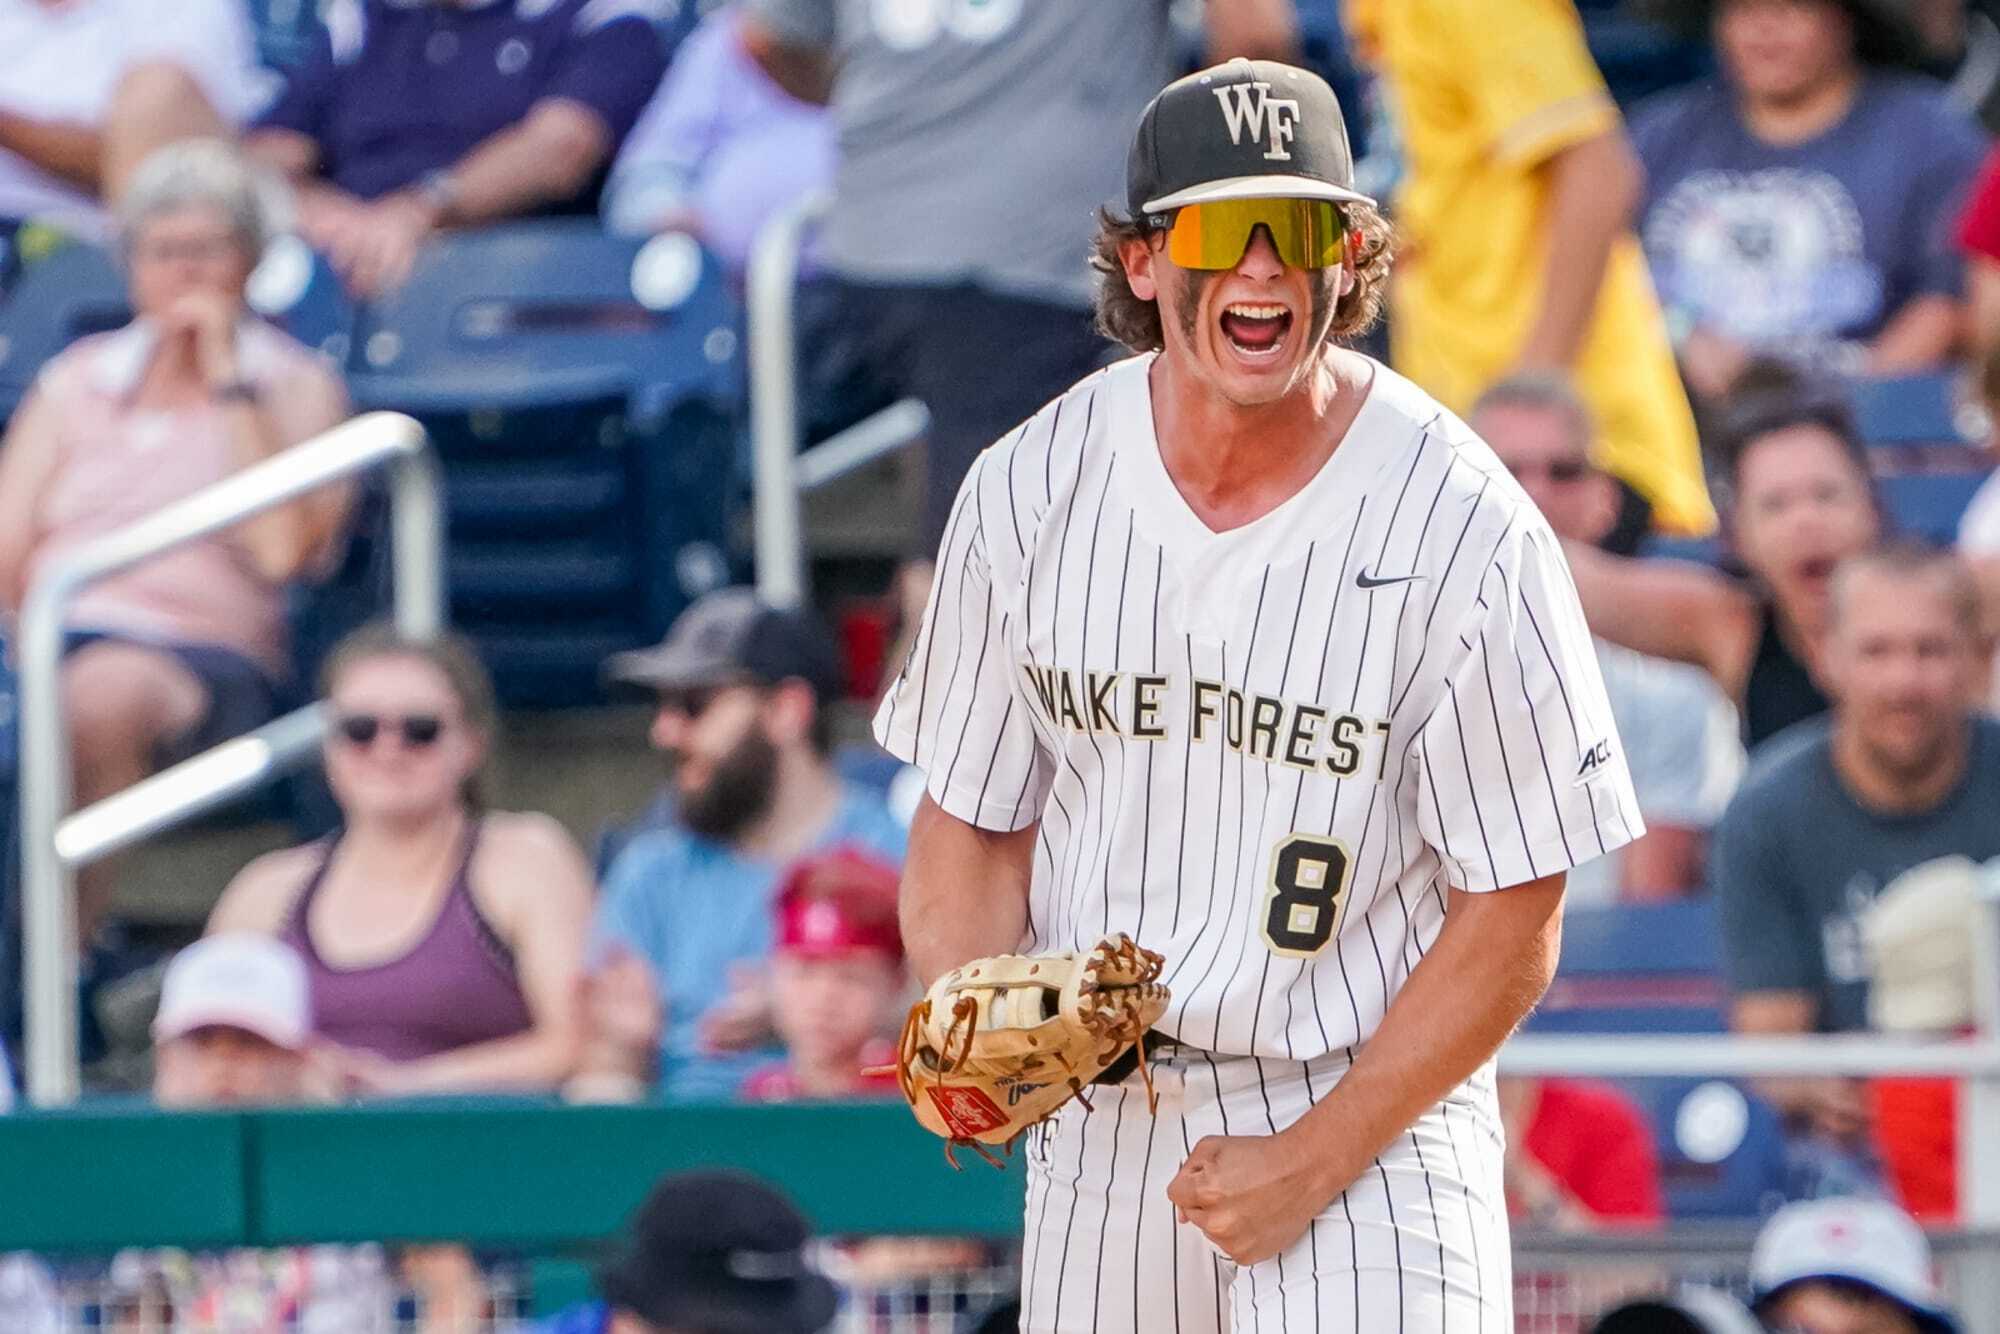 Pitching matchup set for LSU vs. Wake Forest: Skenes vs. Lowder